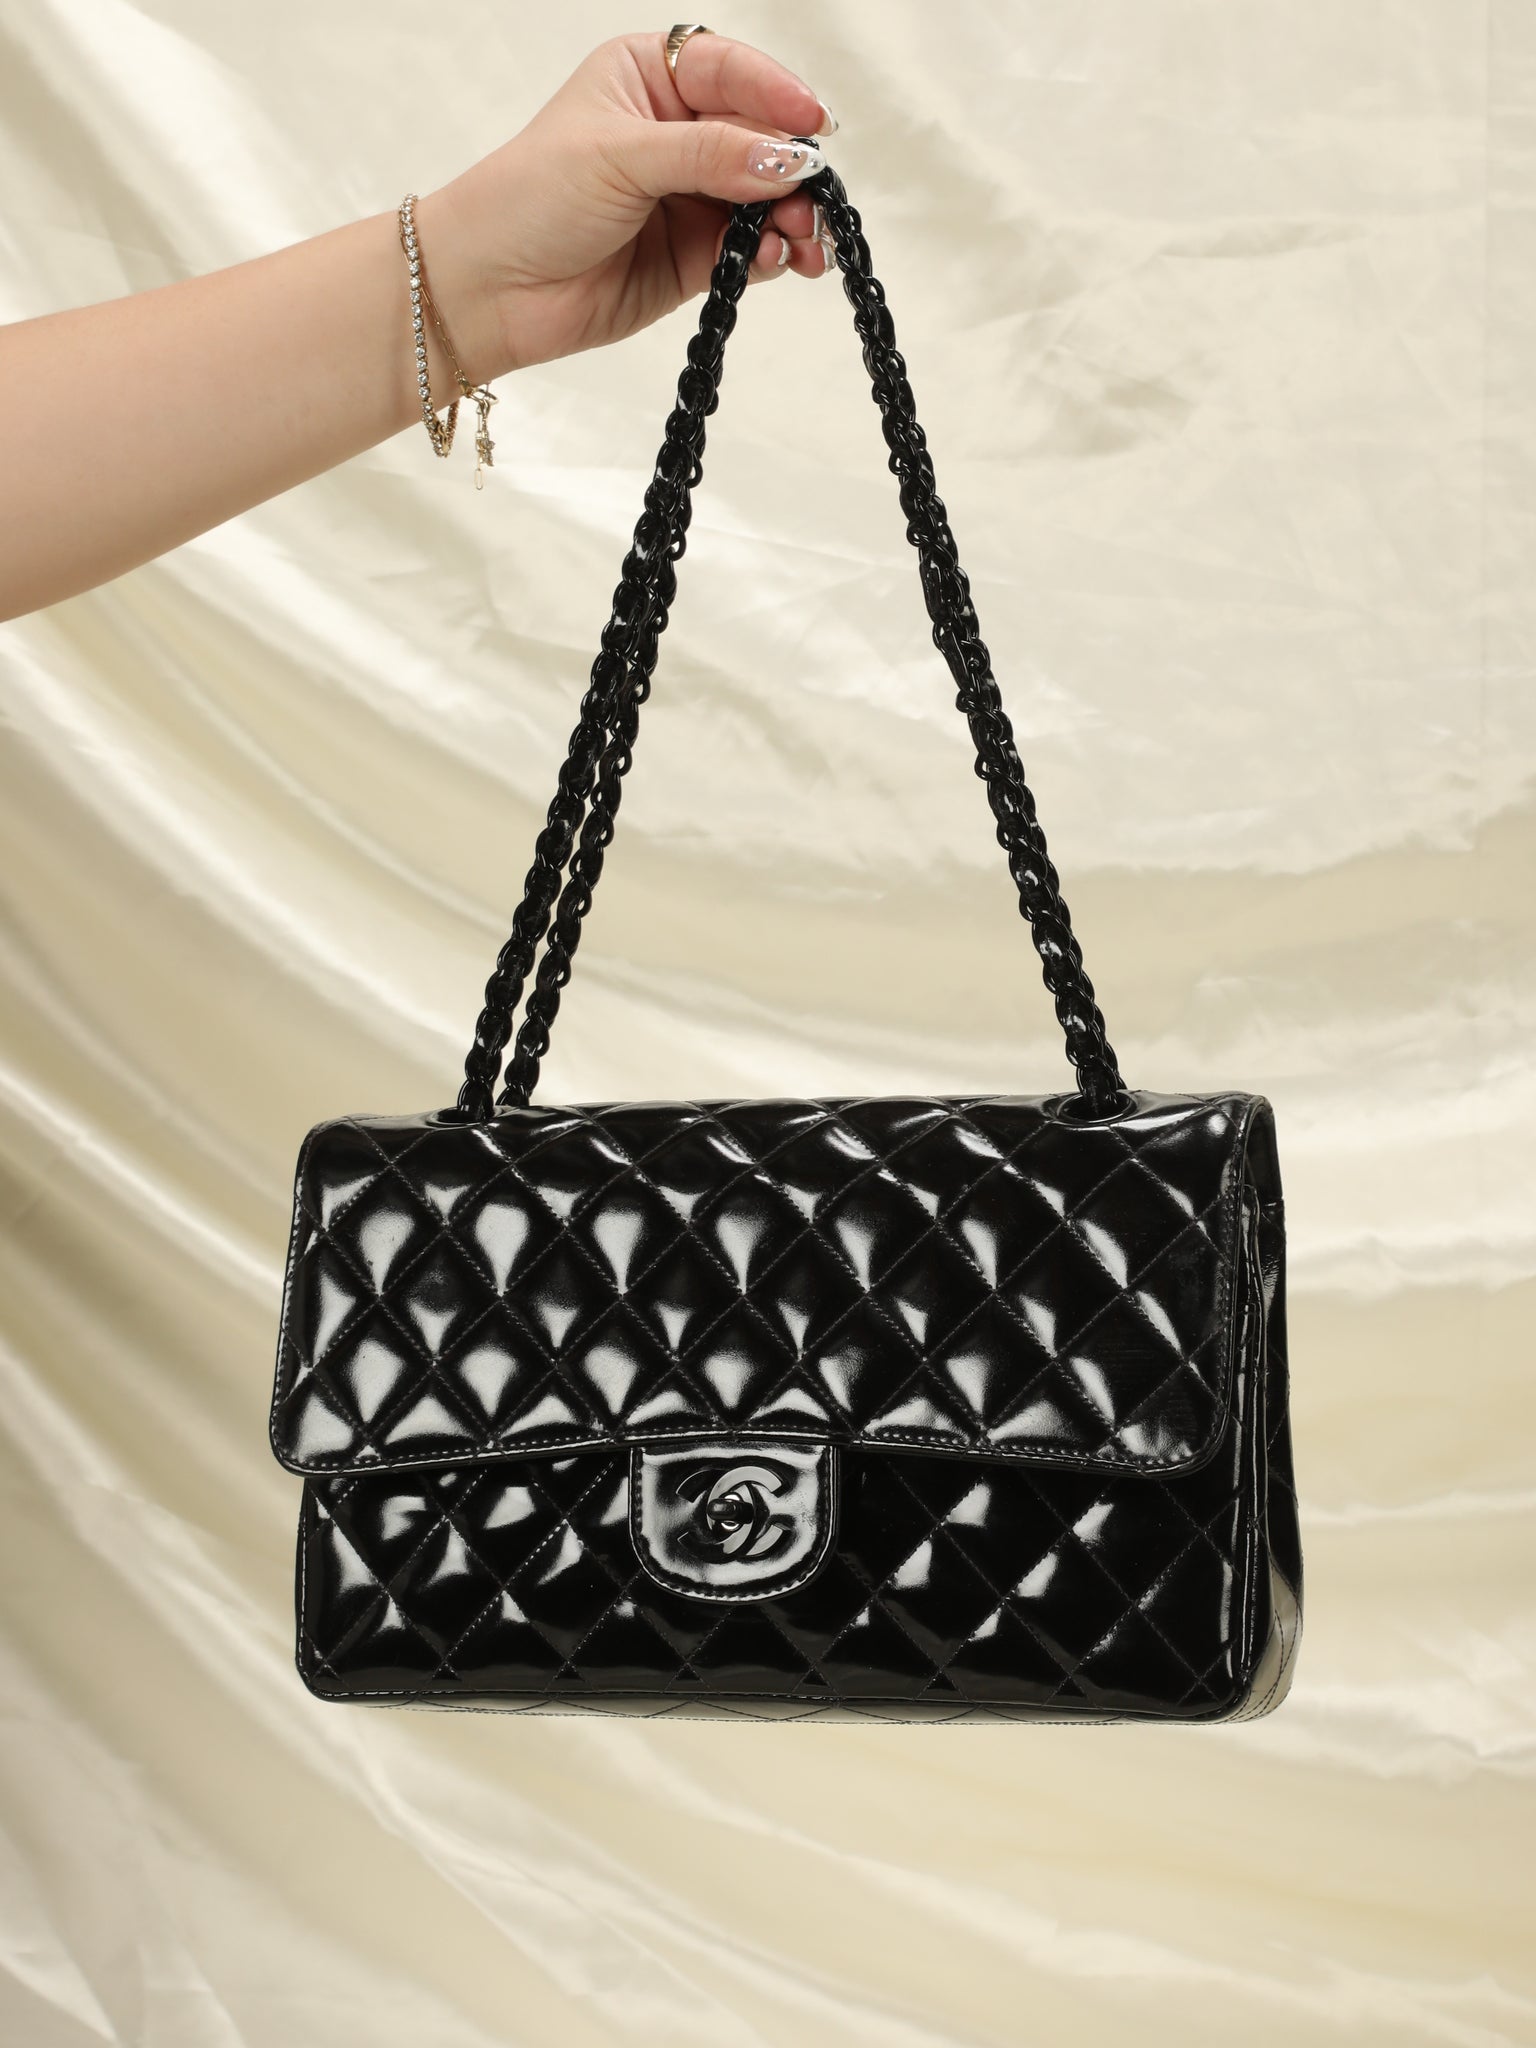 CHANEL WOC Patent Leather Bags & Handbags for Women